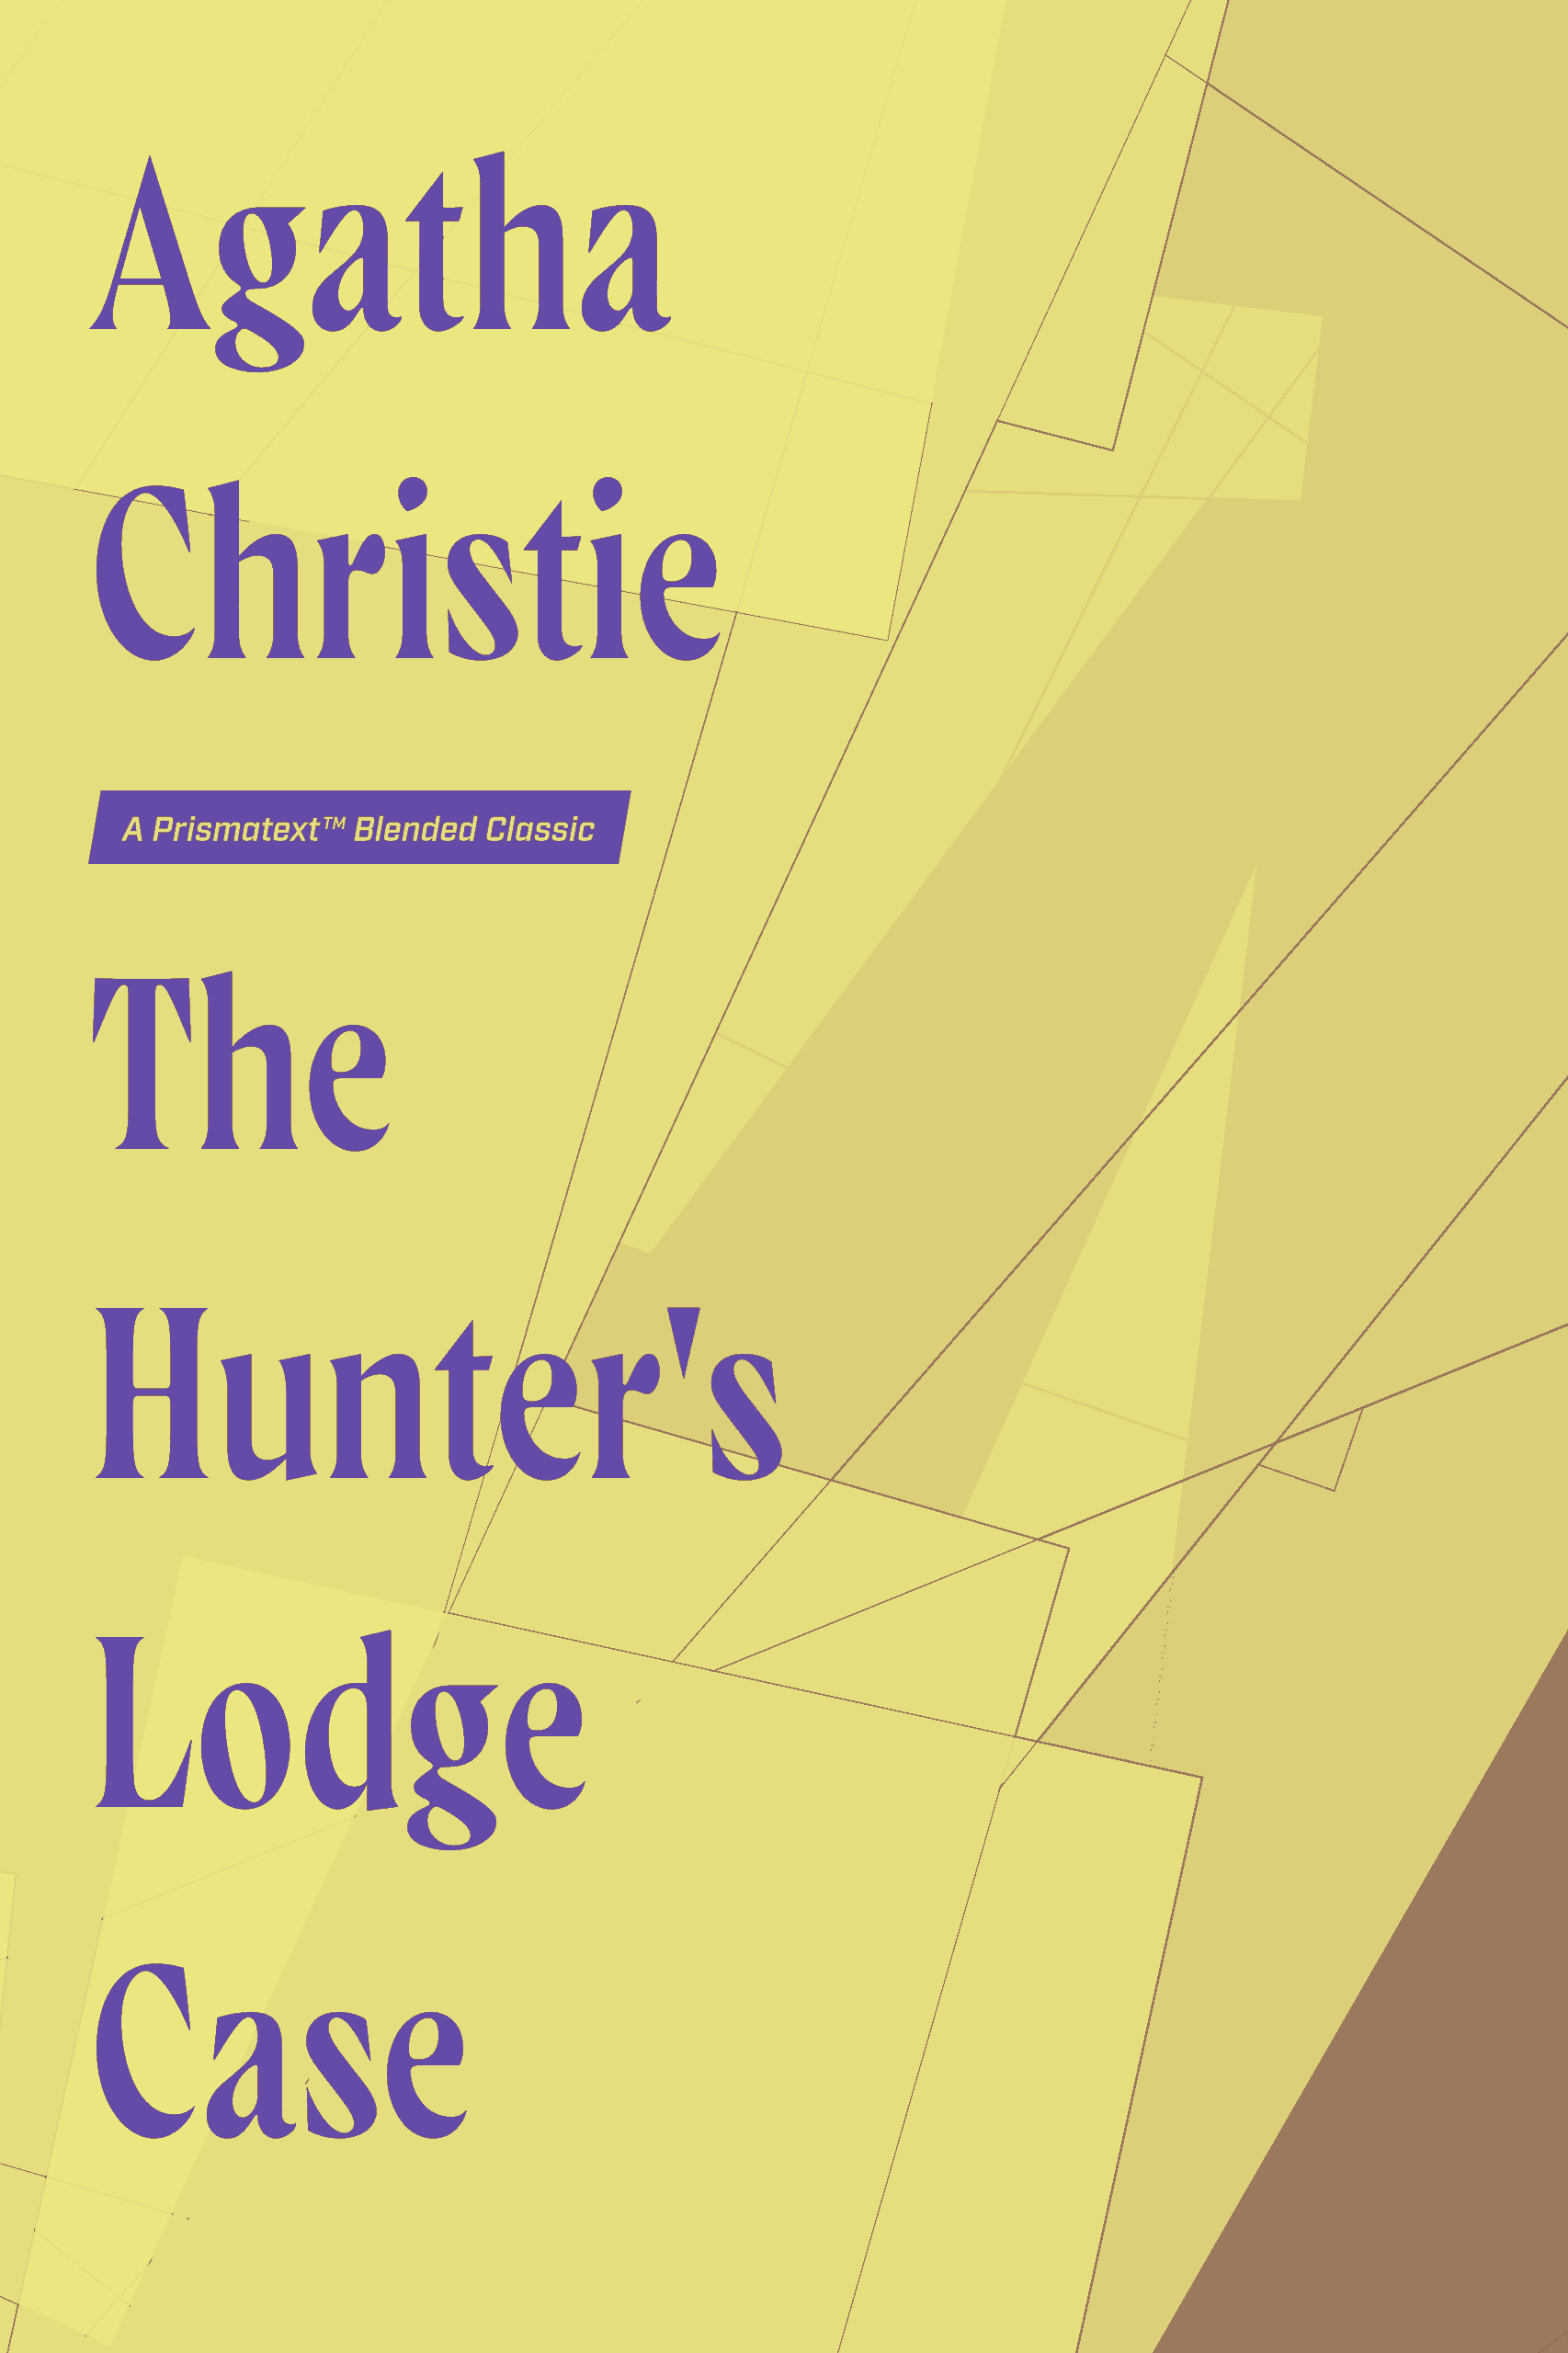 The Hunter's Lodge Case by Agatha Christie